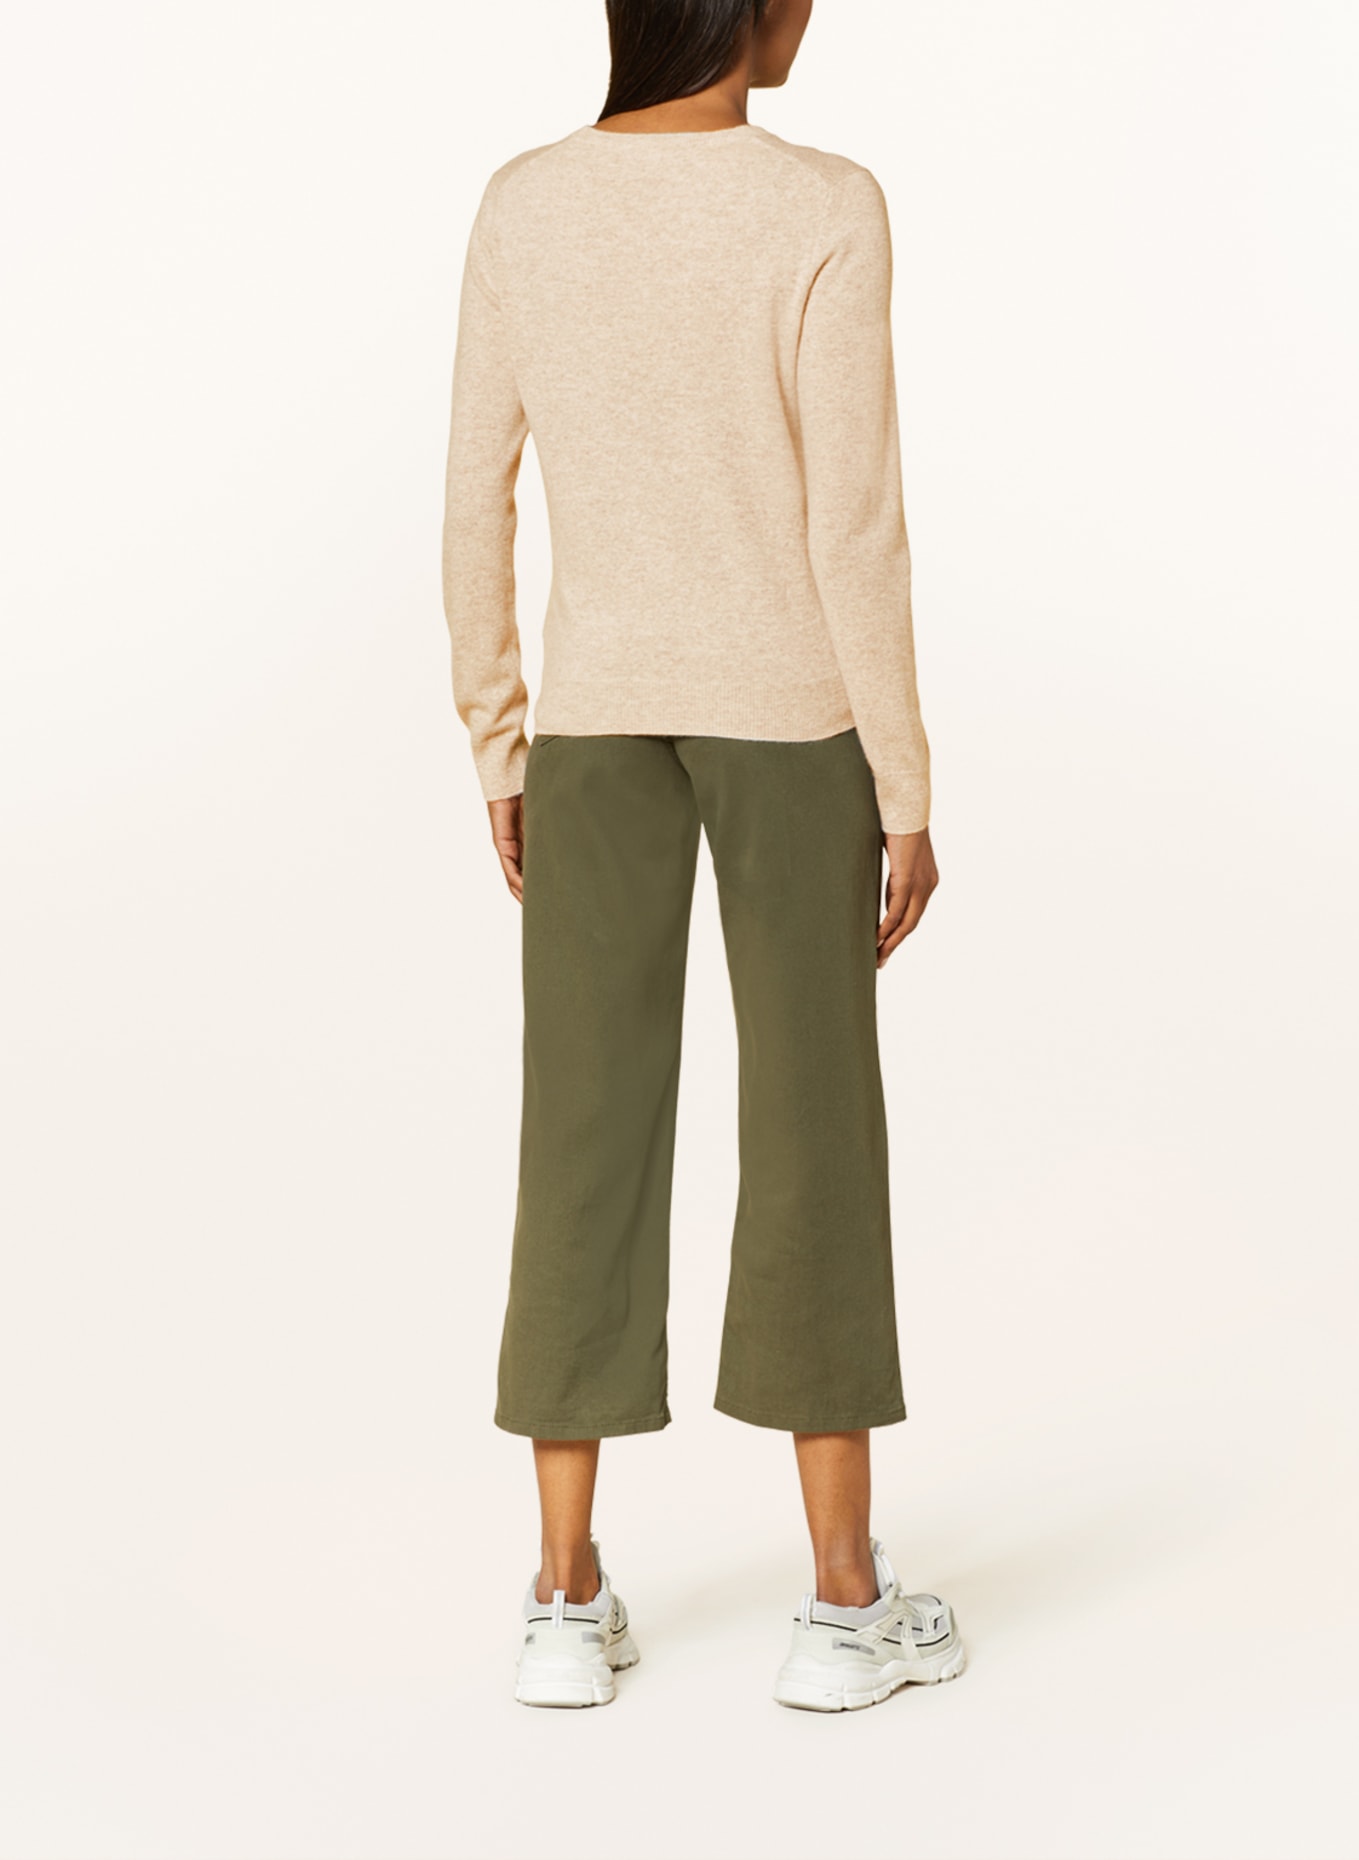 REPEAT Cashmere sweater, Color: BEIGE (Image 3)